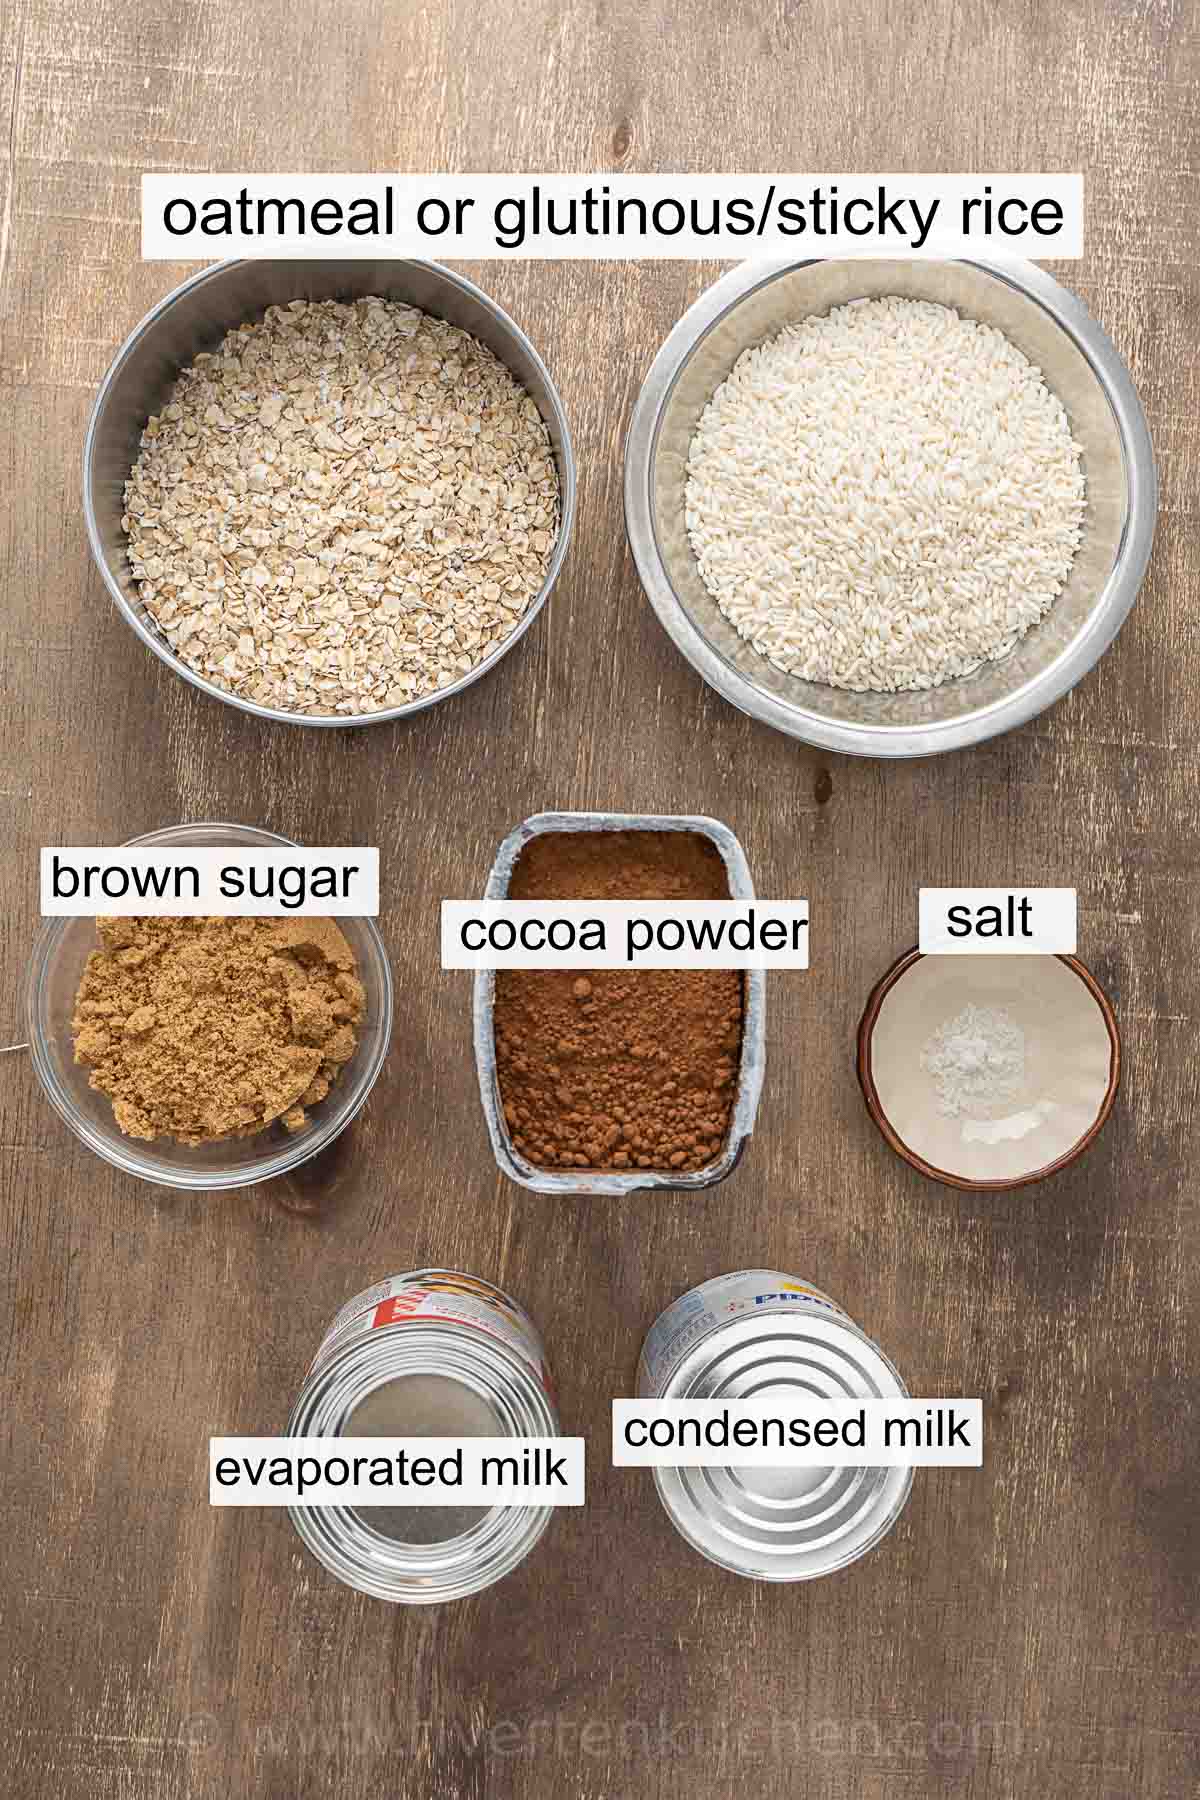 sticky rice, oatmeal, brown sugar, cocoa powder, salt, evaporated milk, and condensed milk.